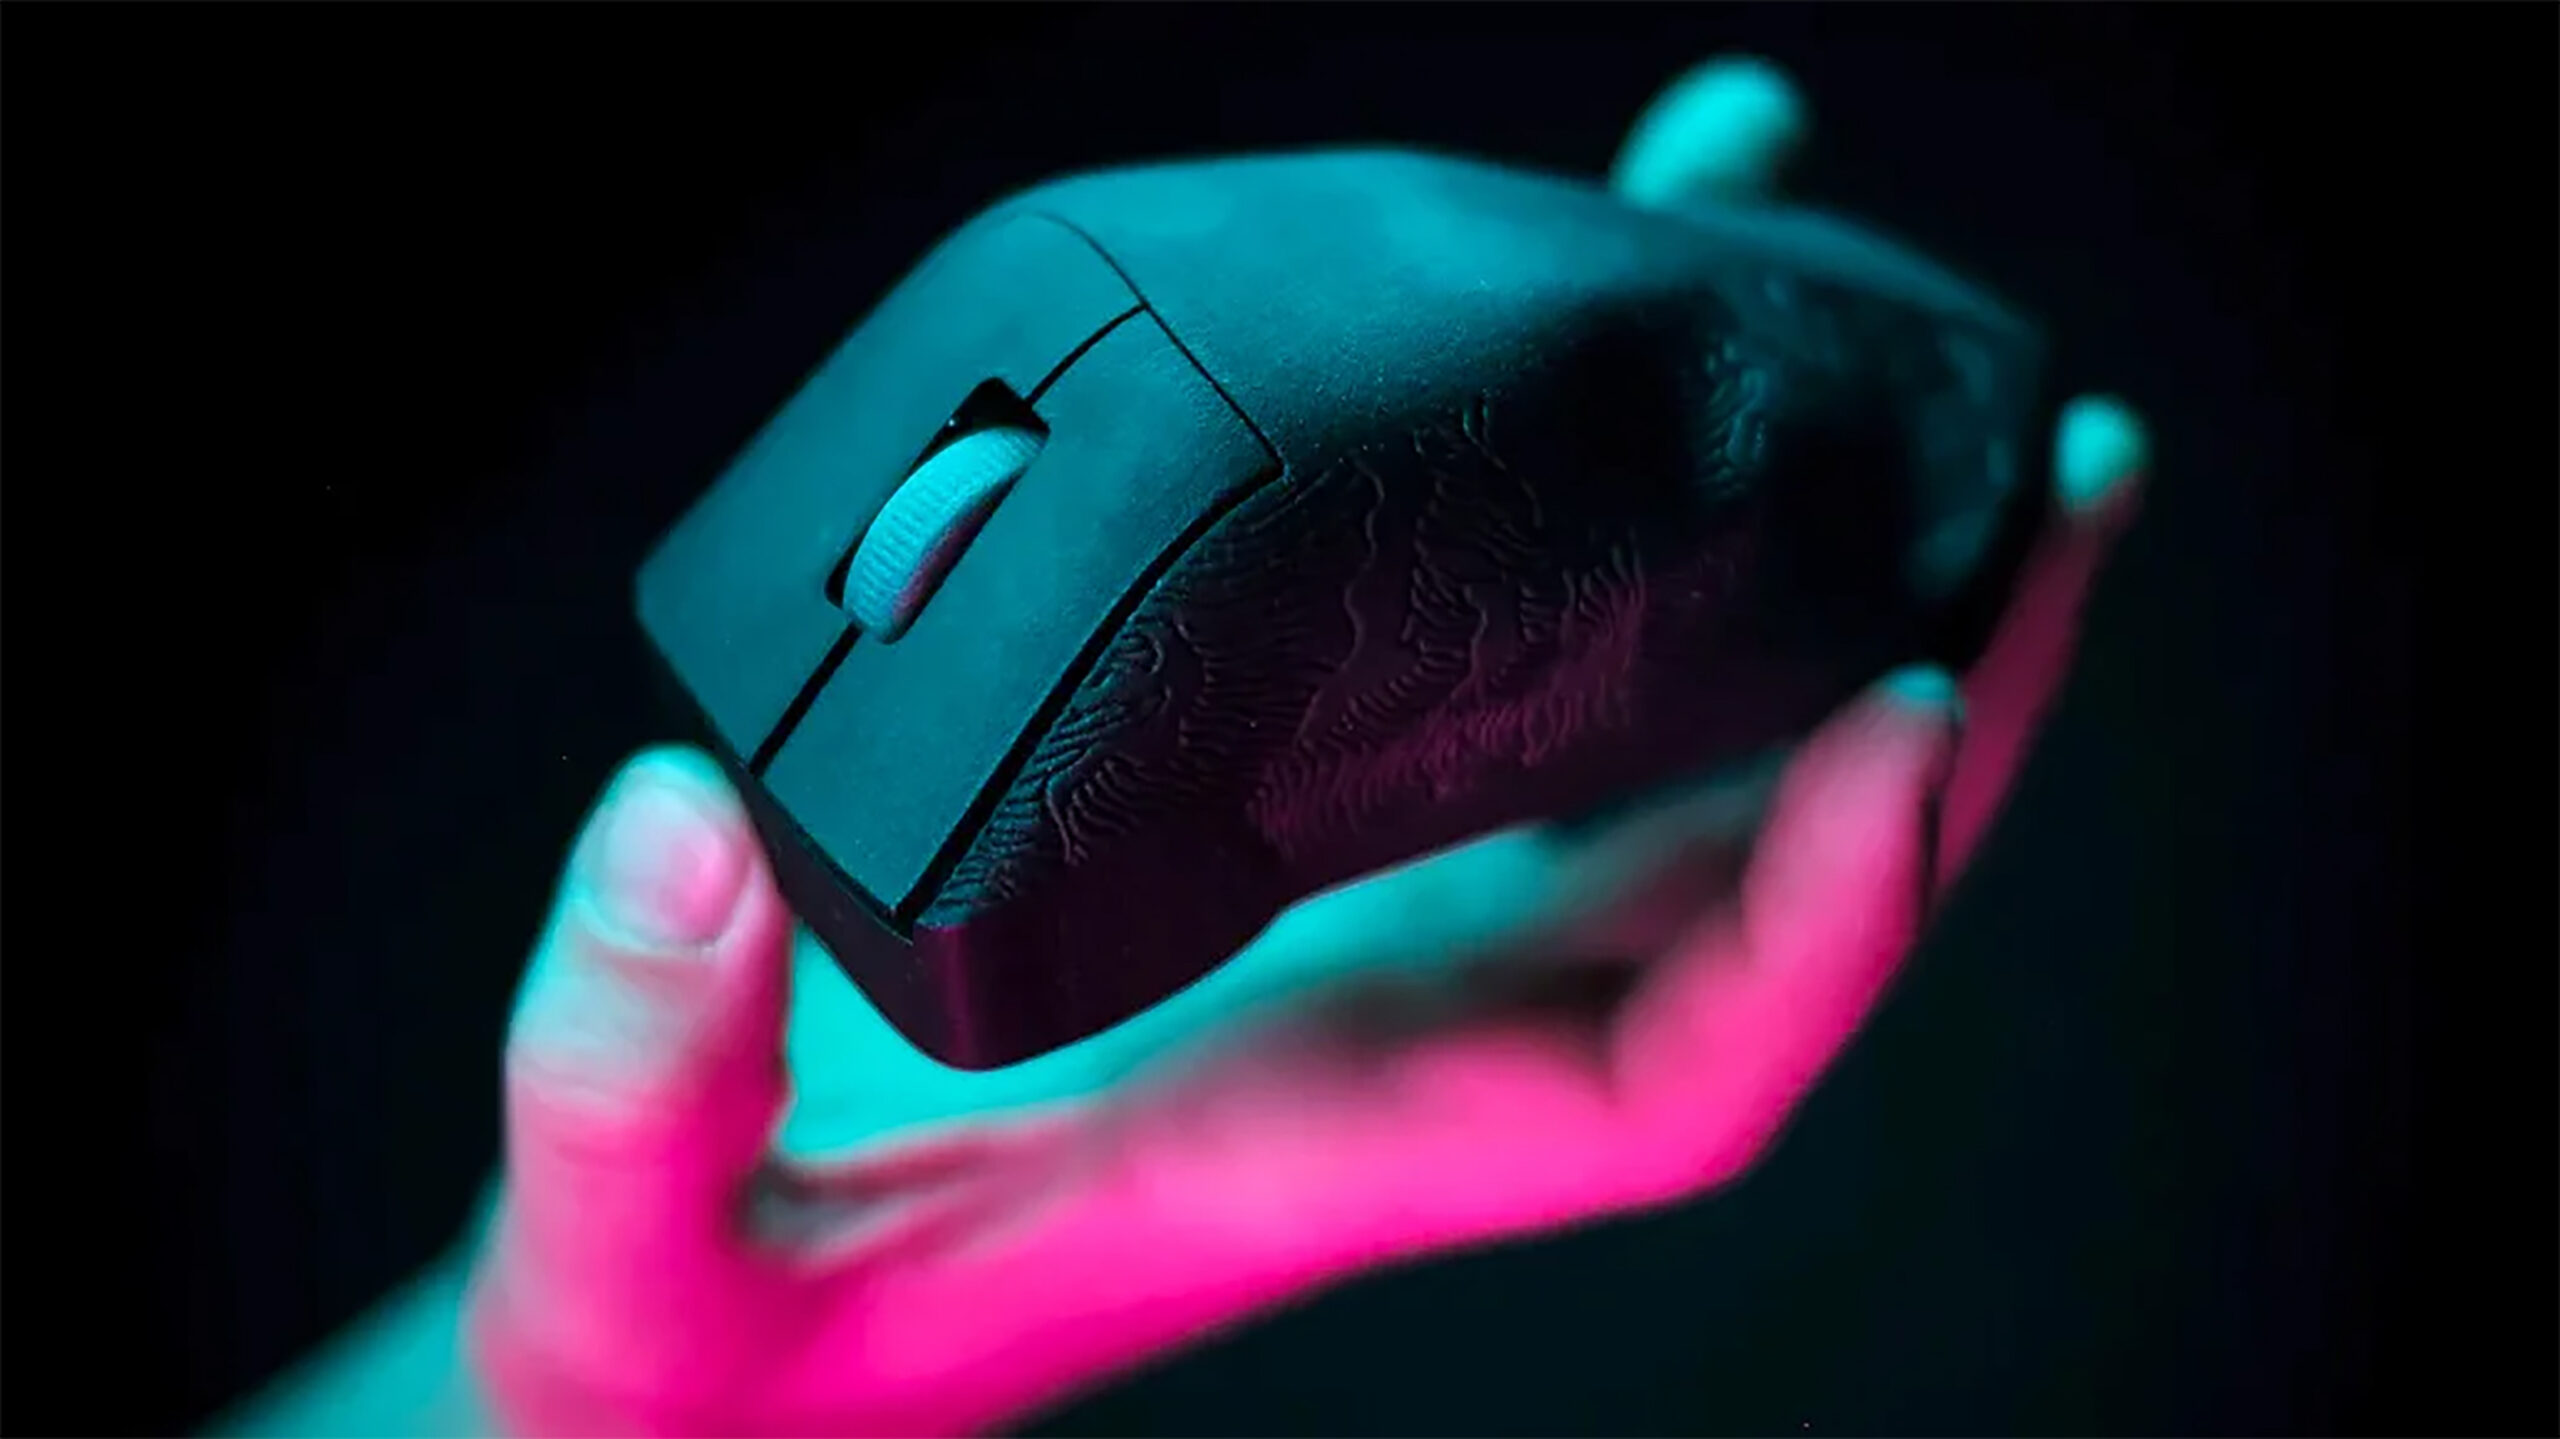 Toronto-based Formify makes a mouse that fits your hand like a glove